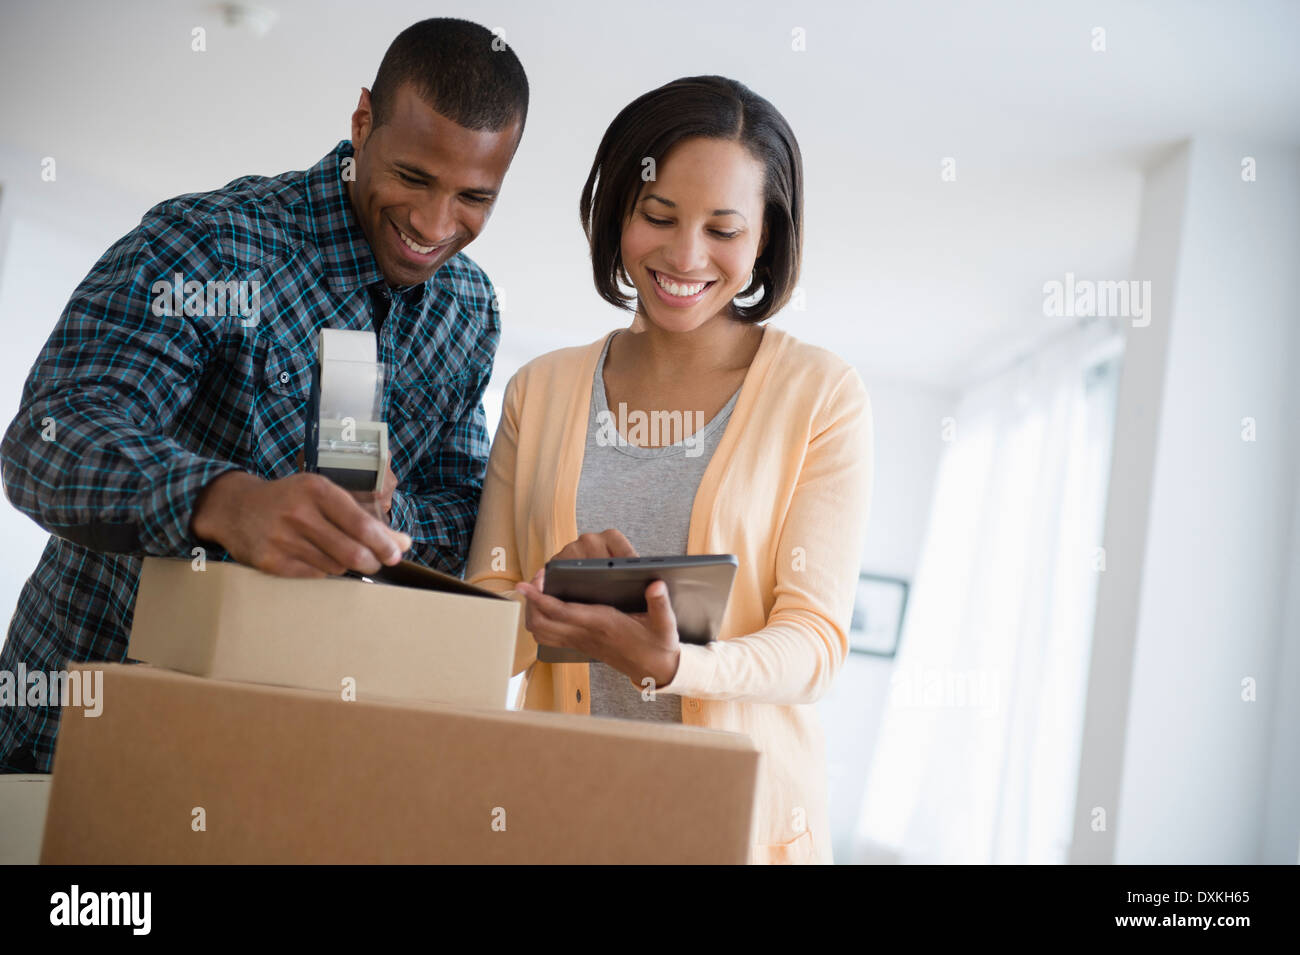 Couple with digital tablet taping up moving boxes Banque D'Images